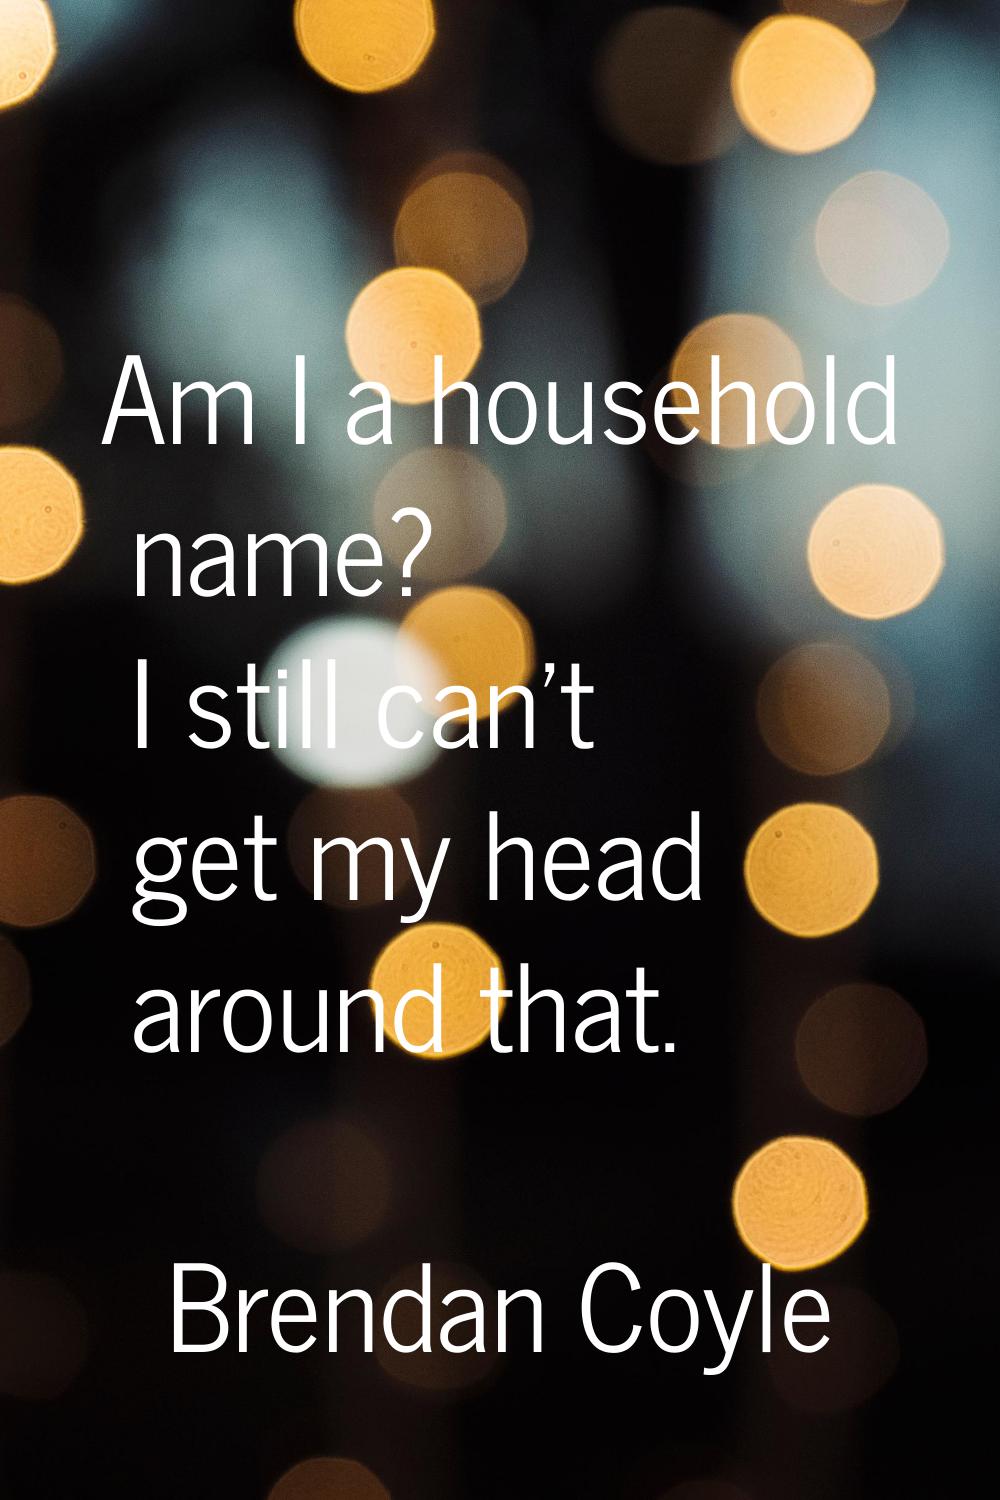 Am I a household name? I still can't get my head around that.